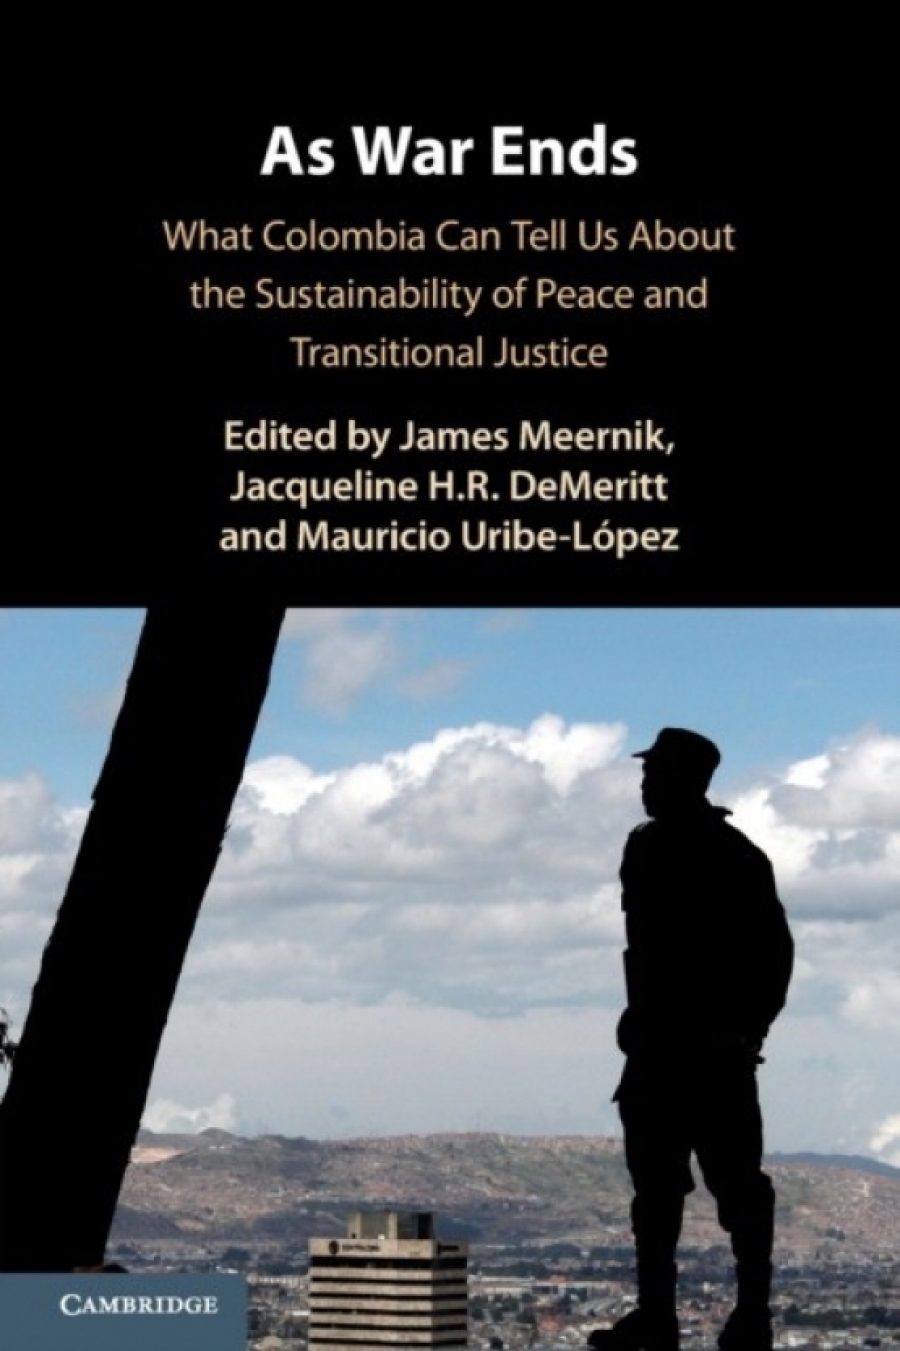 Jacqueline H. R. DeMeritt, James Meernik, Mauricio As War Ends: What Colombia Can Tell Us About the Sustainability of Peace and Transitional Justice 